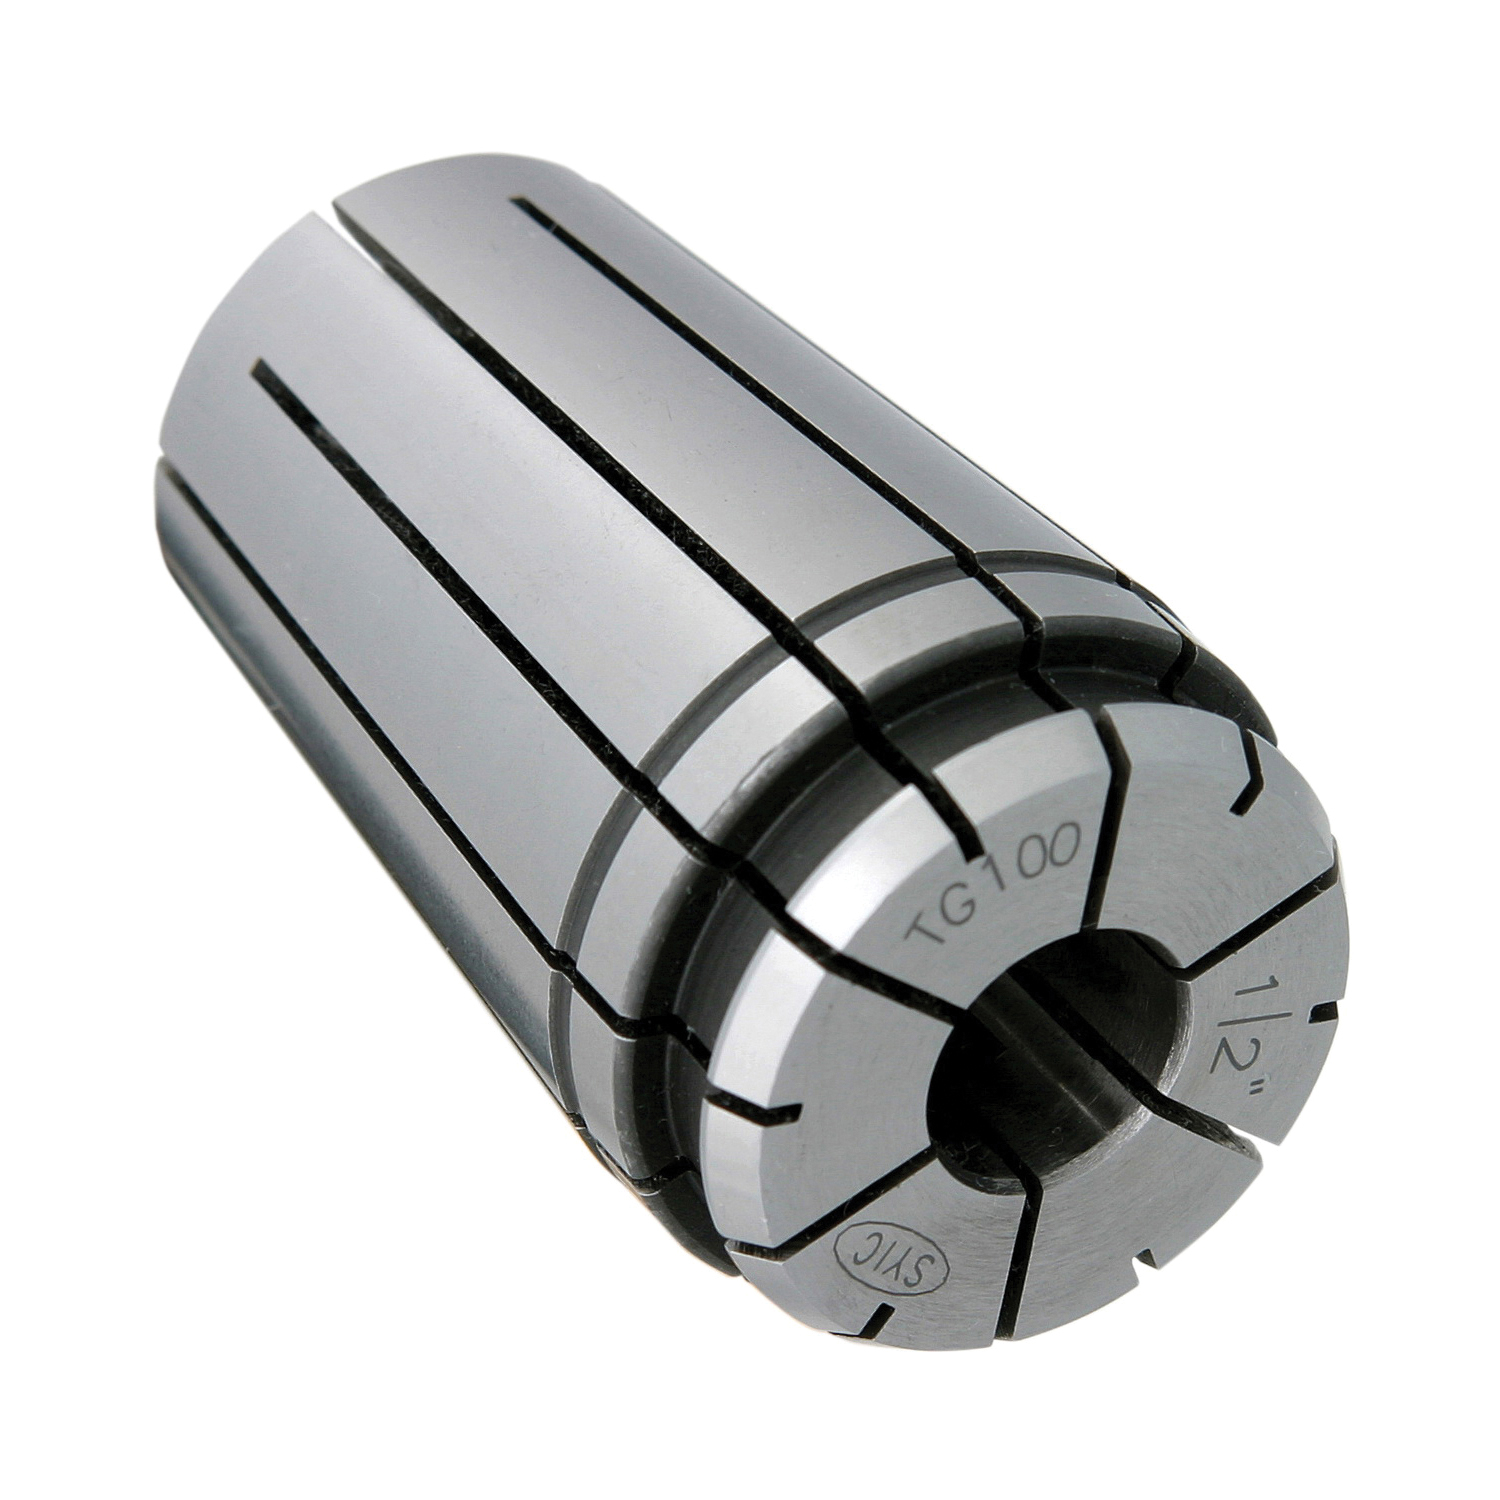 TG100 9/16" COLLET